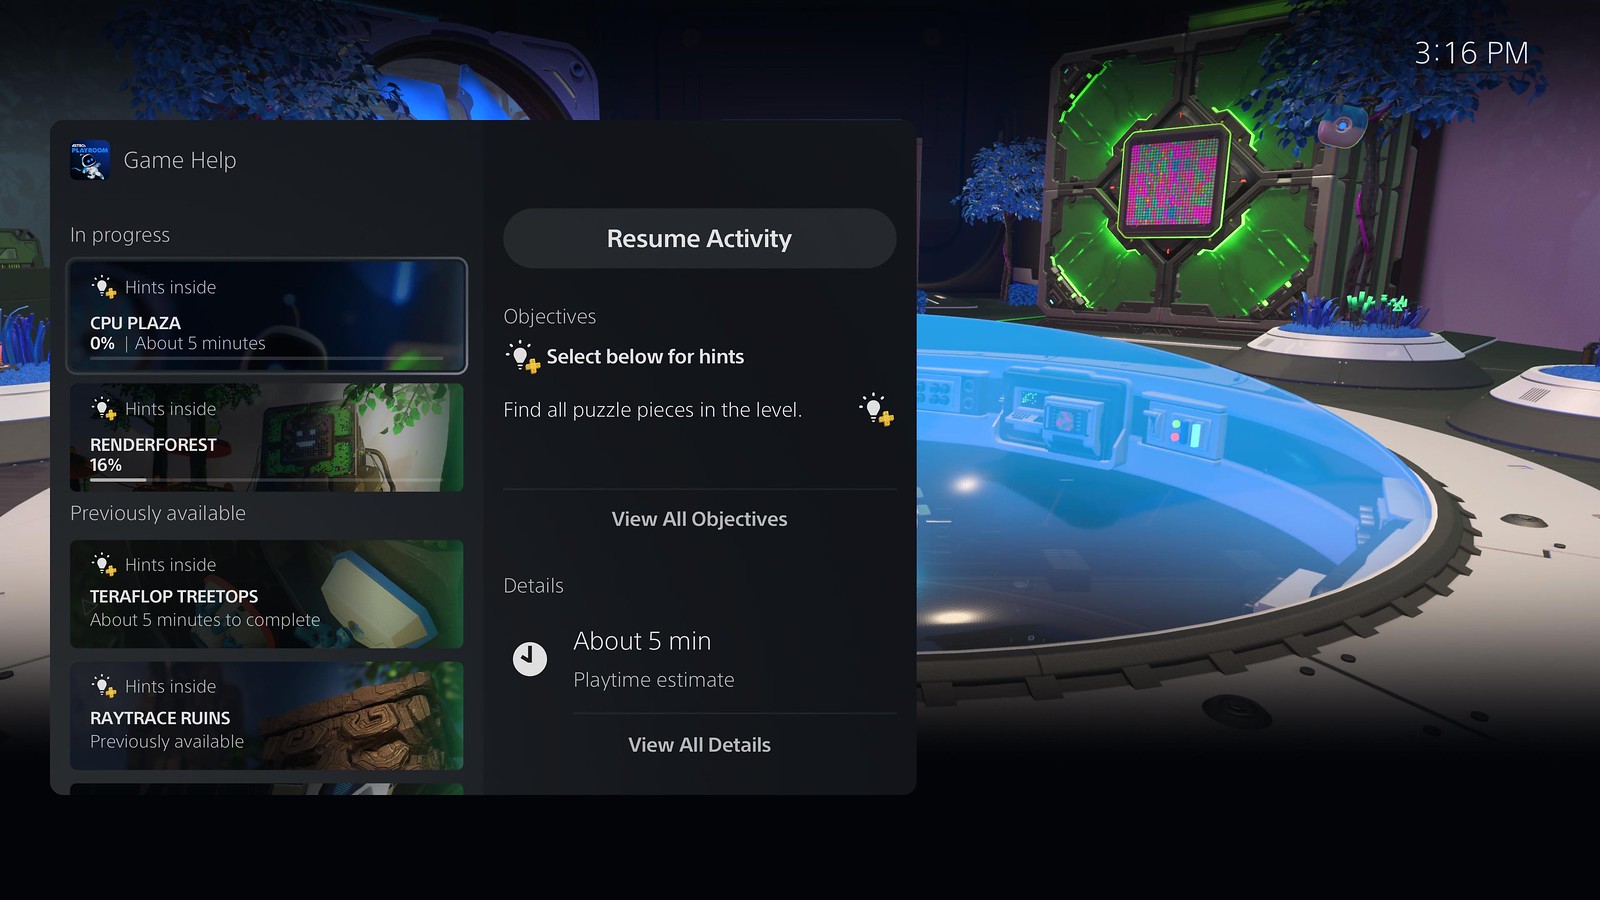 PS5 UI screen showing the newly enhanced Game Help cards.